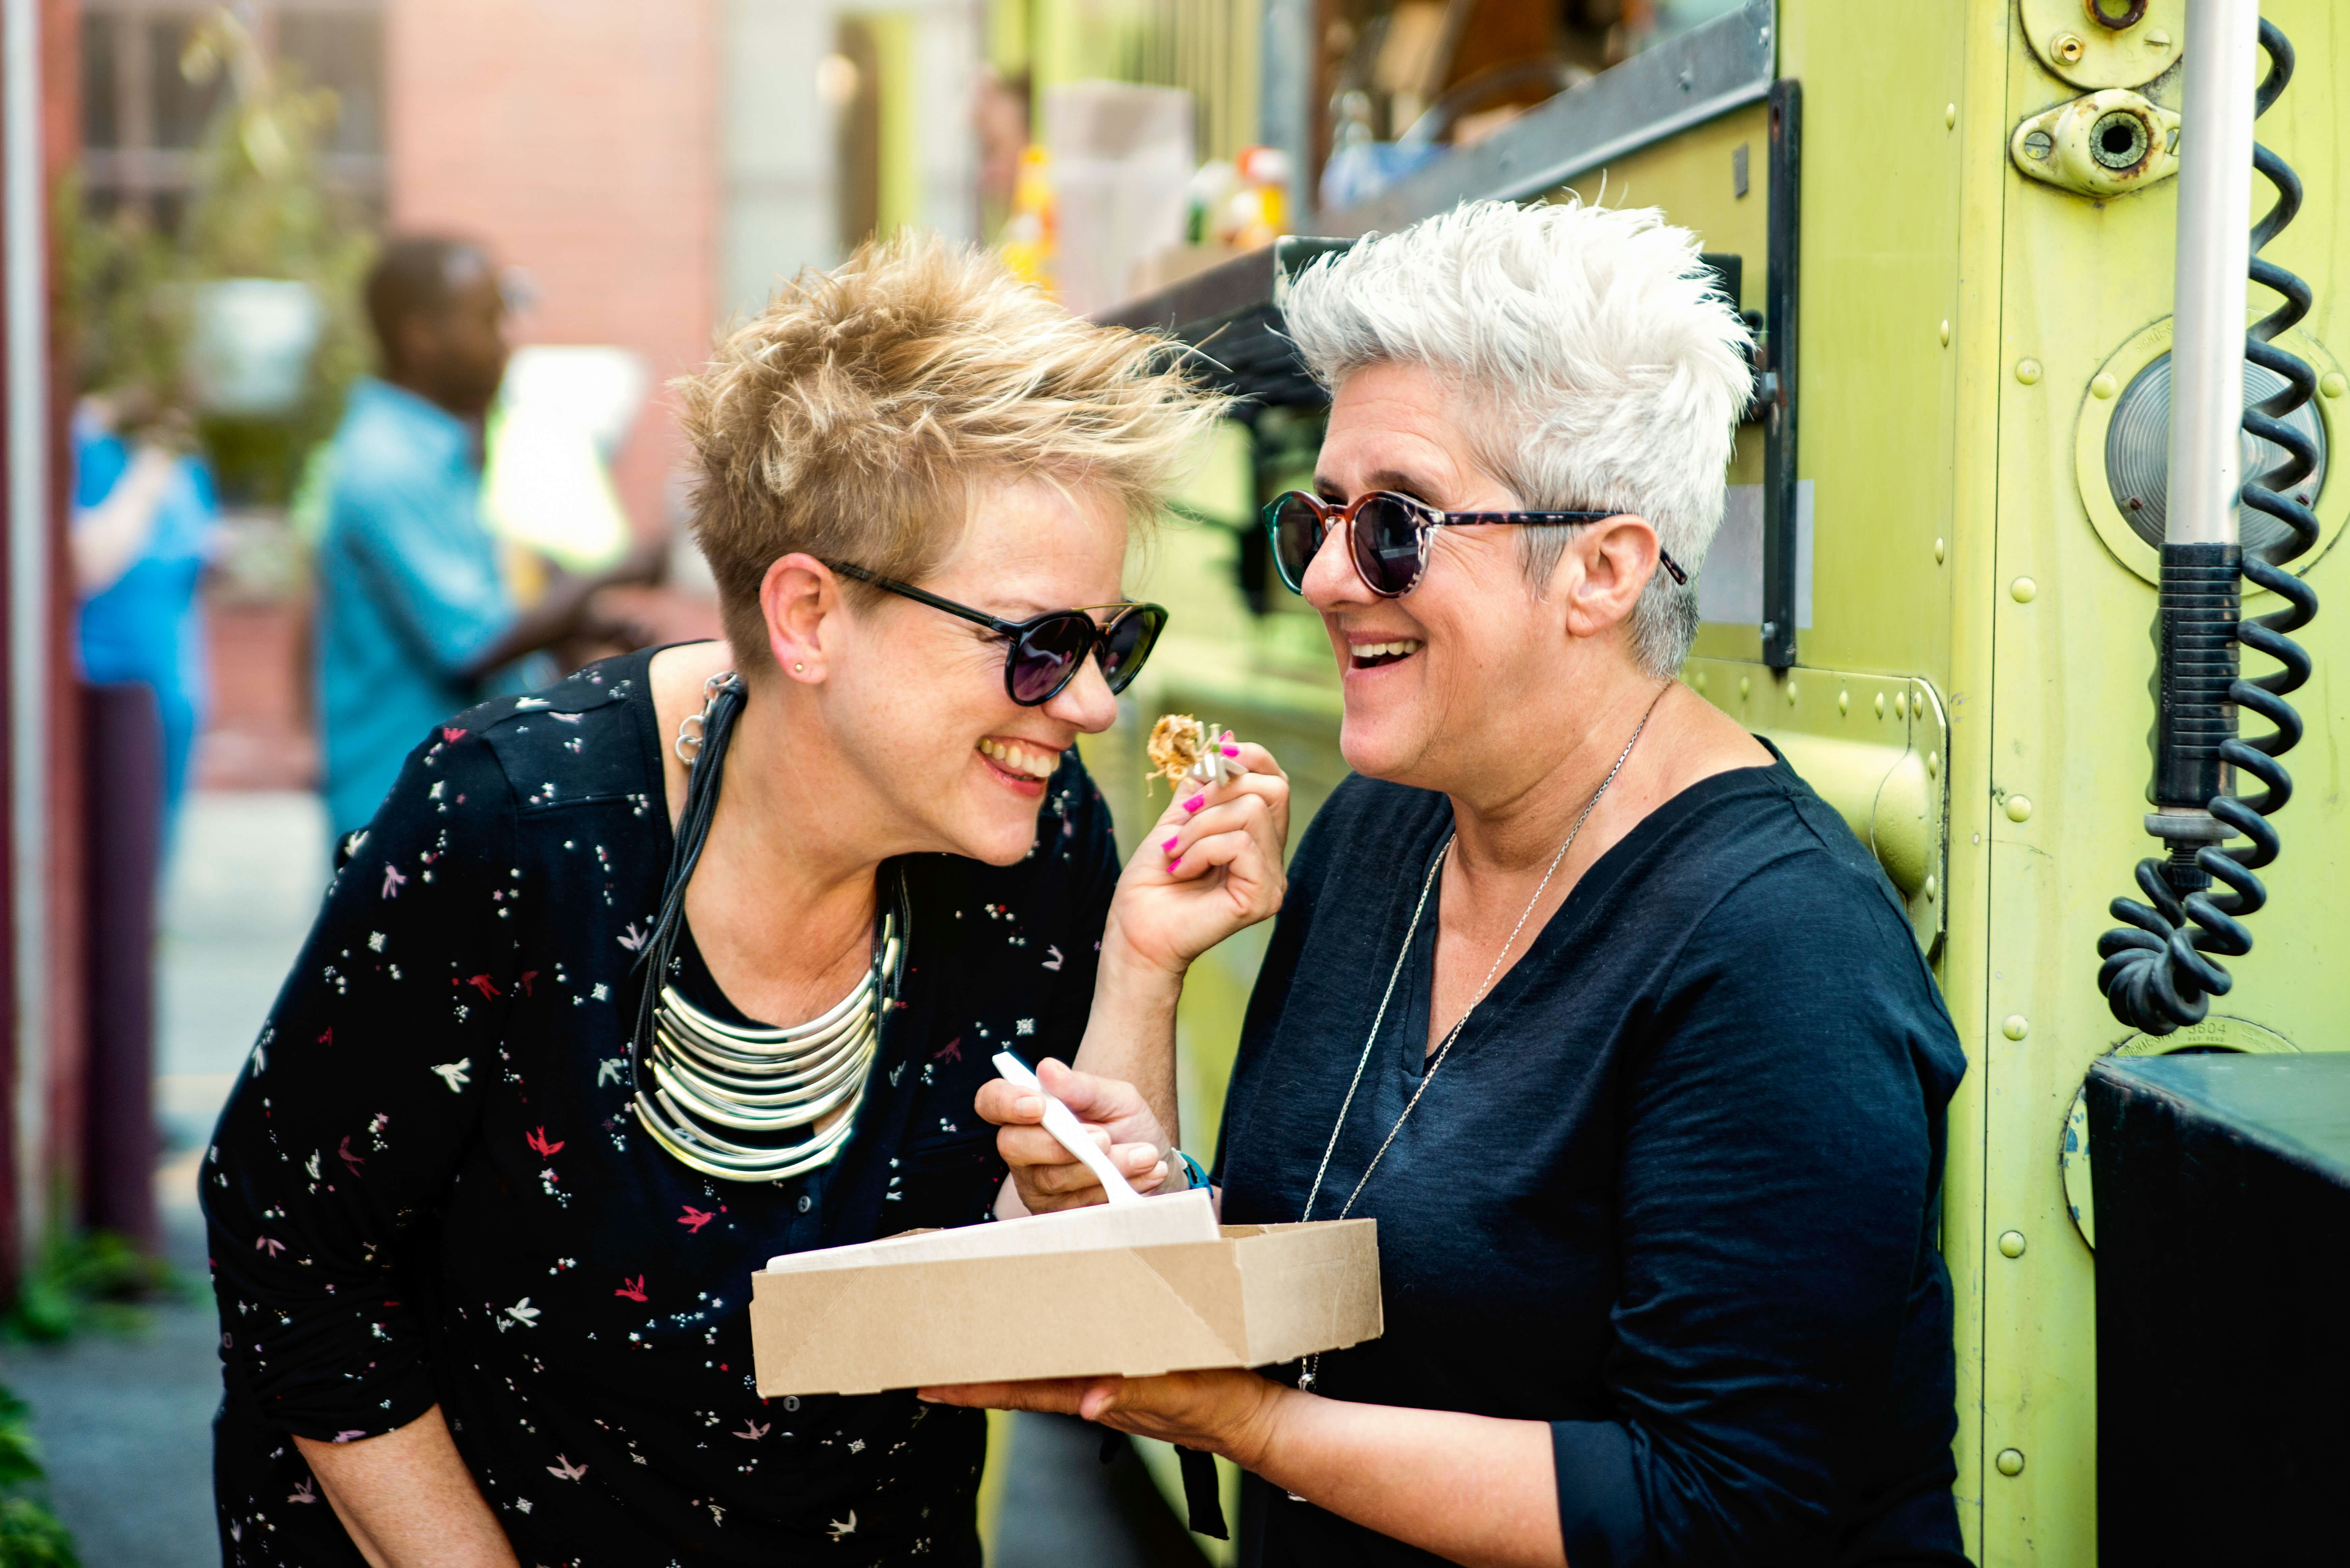 Couple of mature women enjoying their food from a food truck in city street.